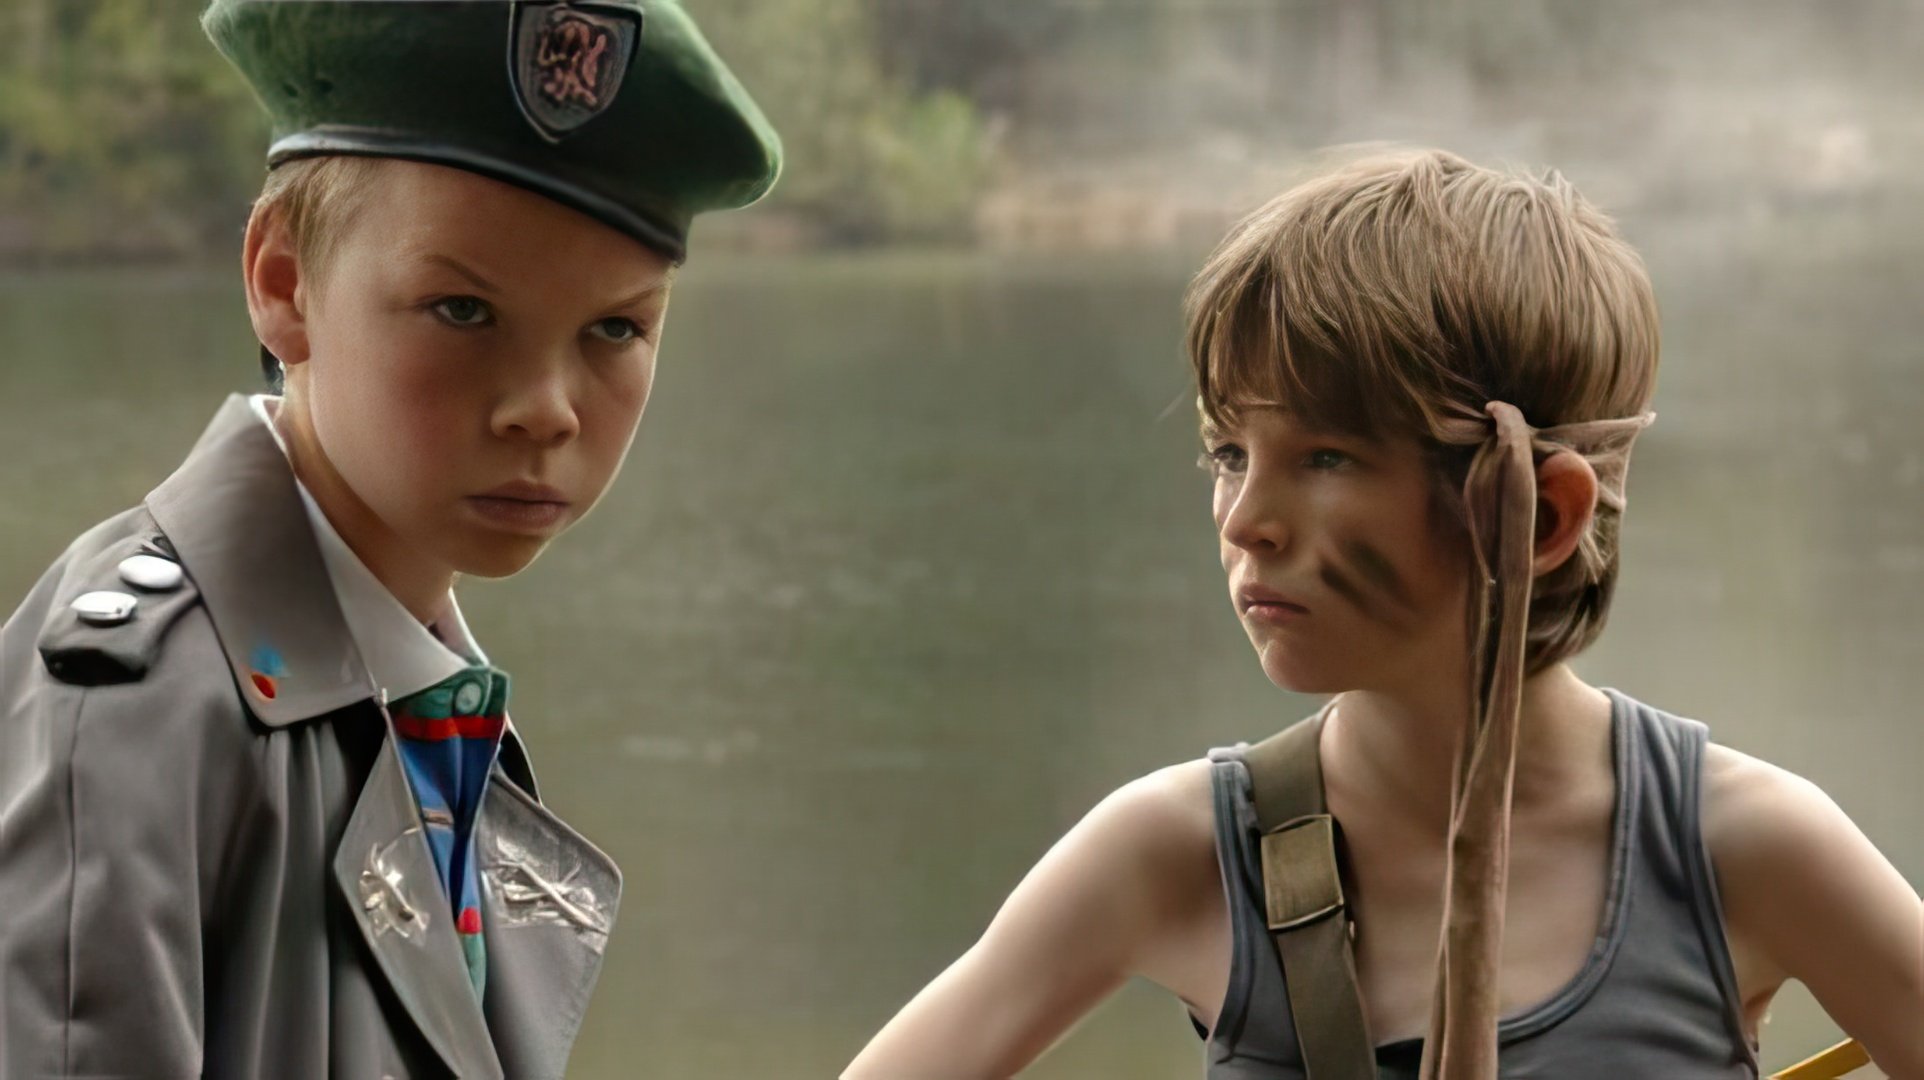 A scene from the movie 'Son of Rambow'